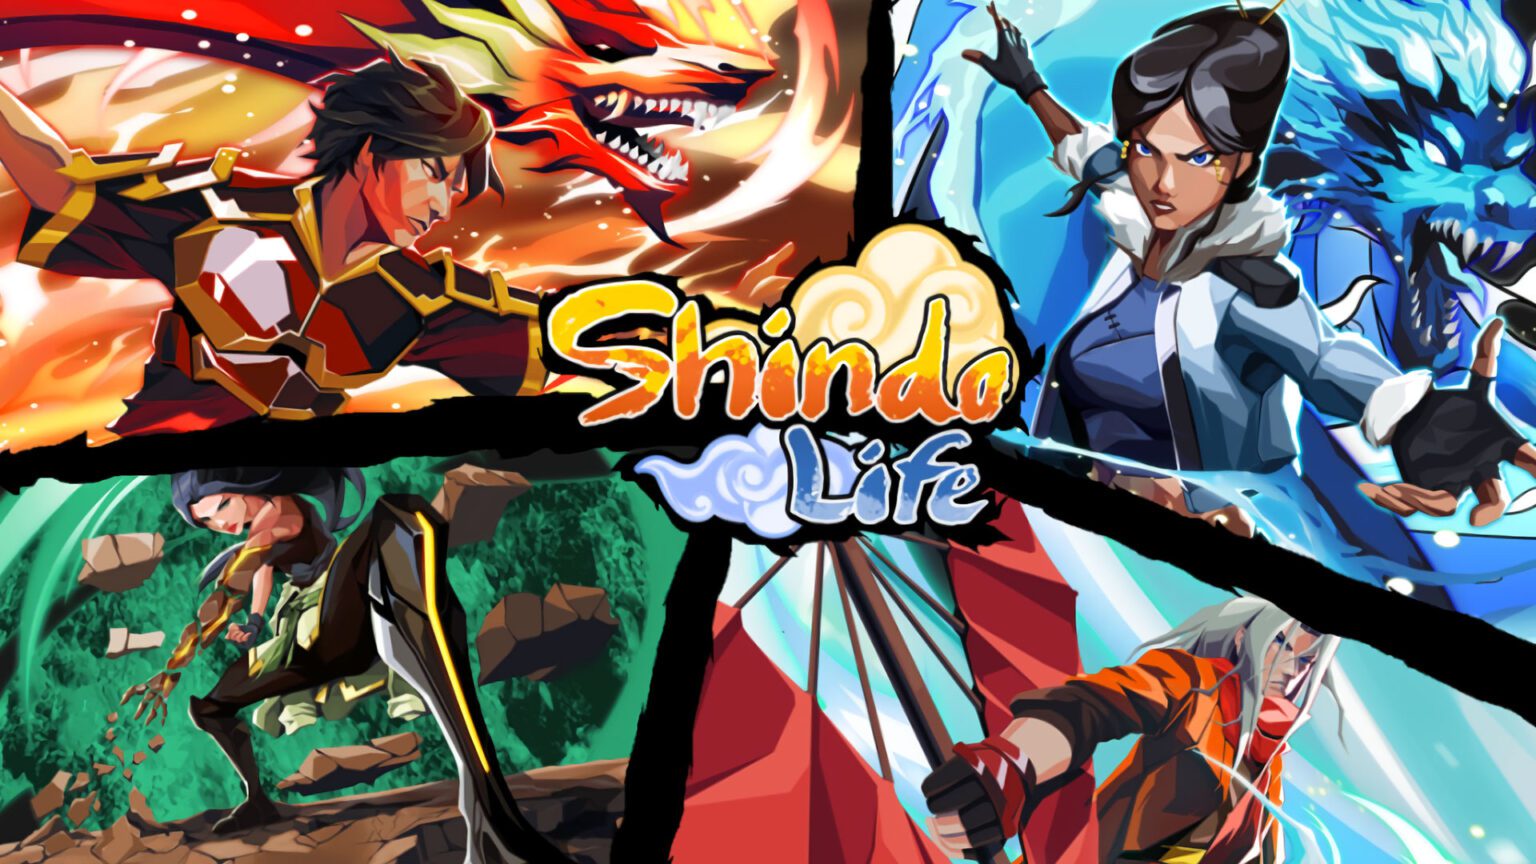 New Spear of Tyn update for Shindo Life!